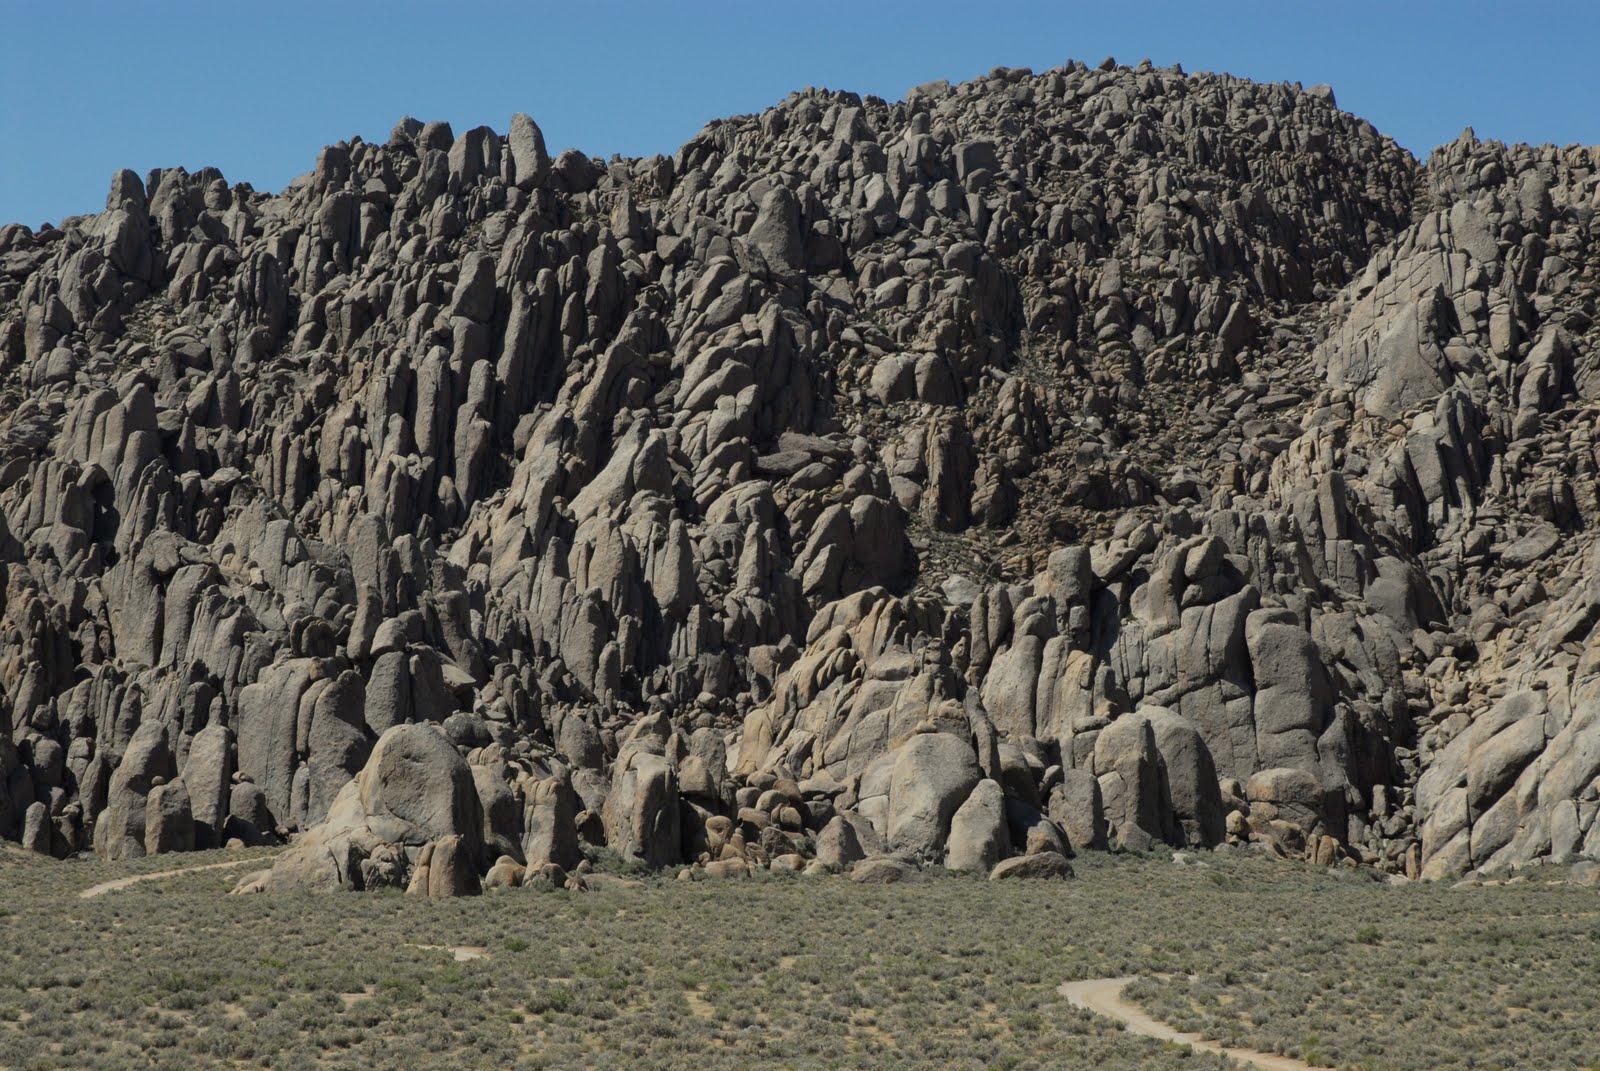 RVing Beach Bums: Alabama Hills & Onion Valley Road, CA